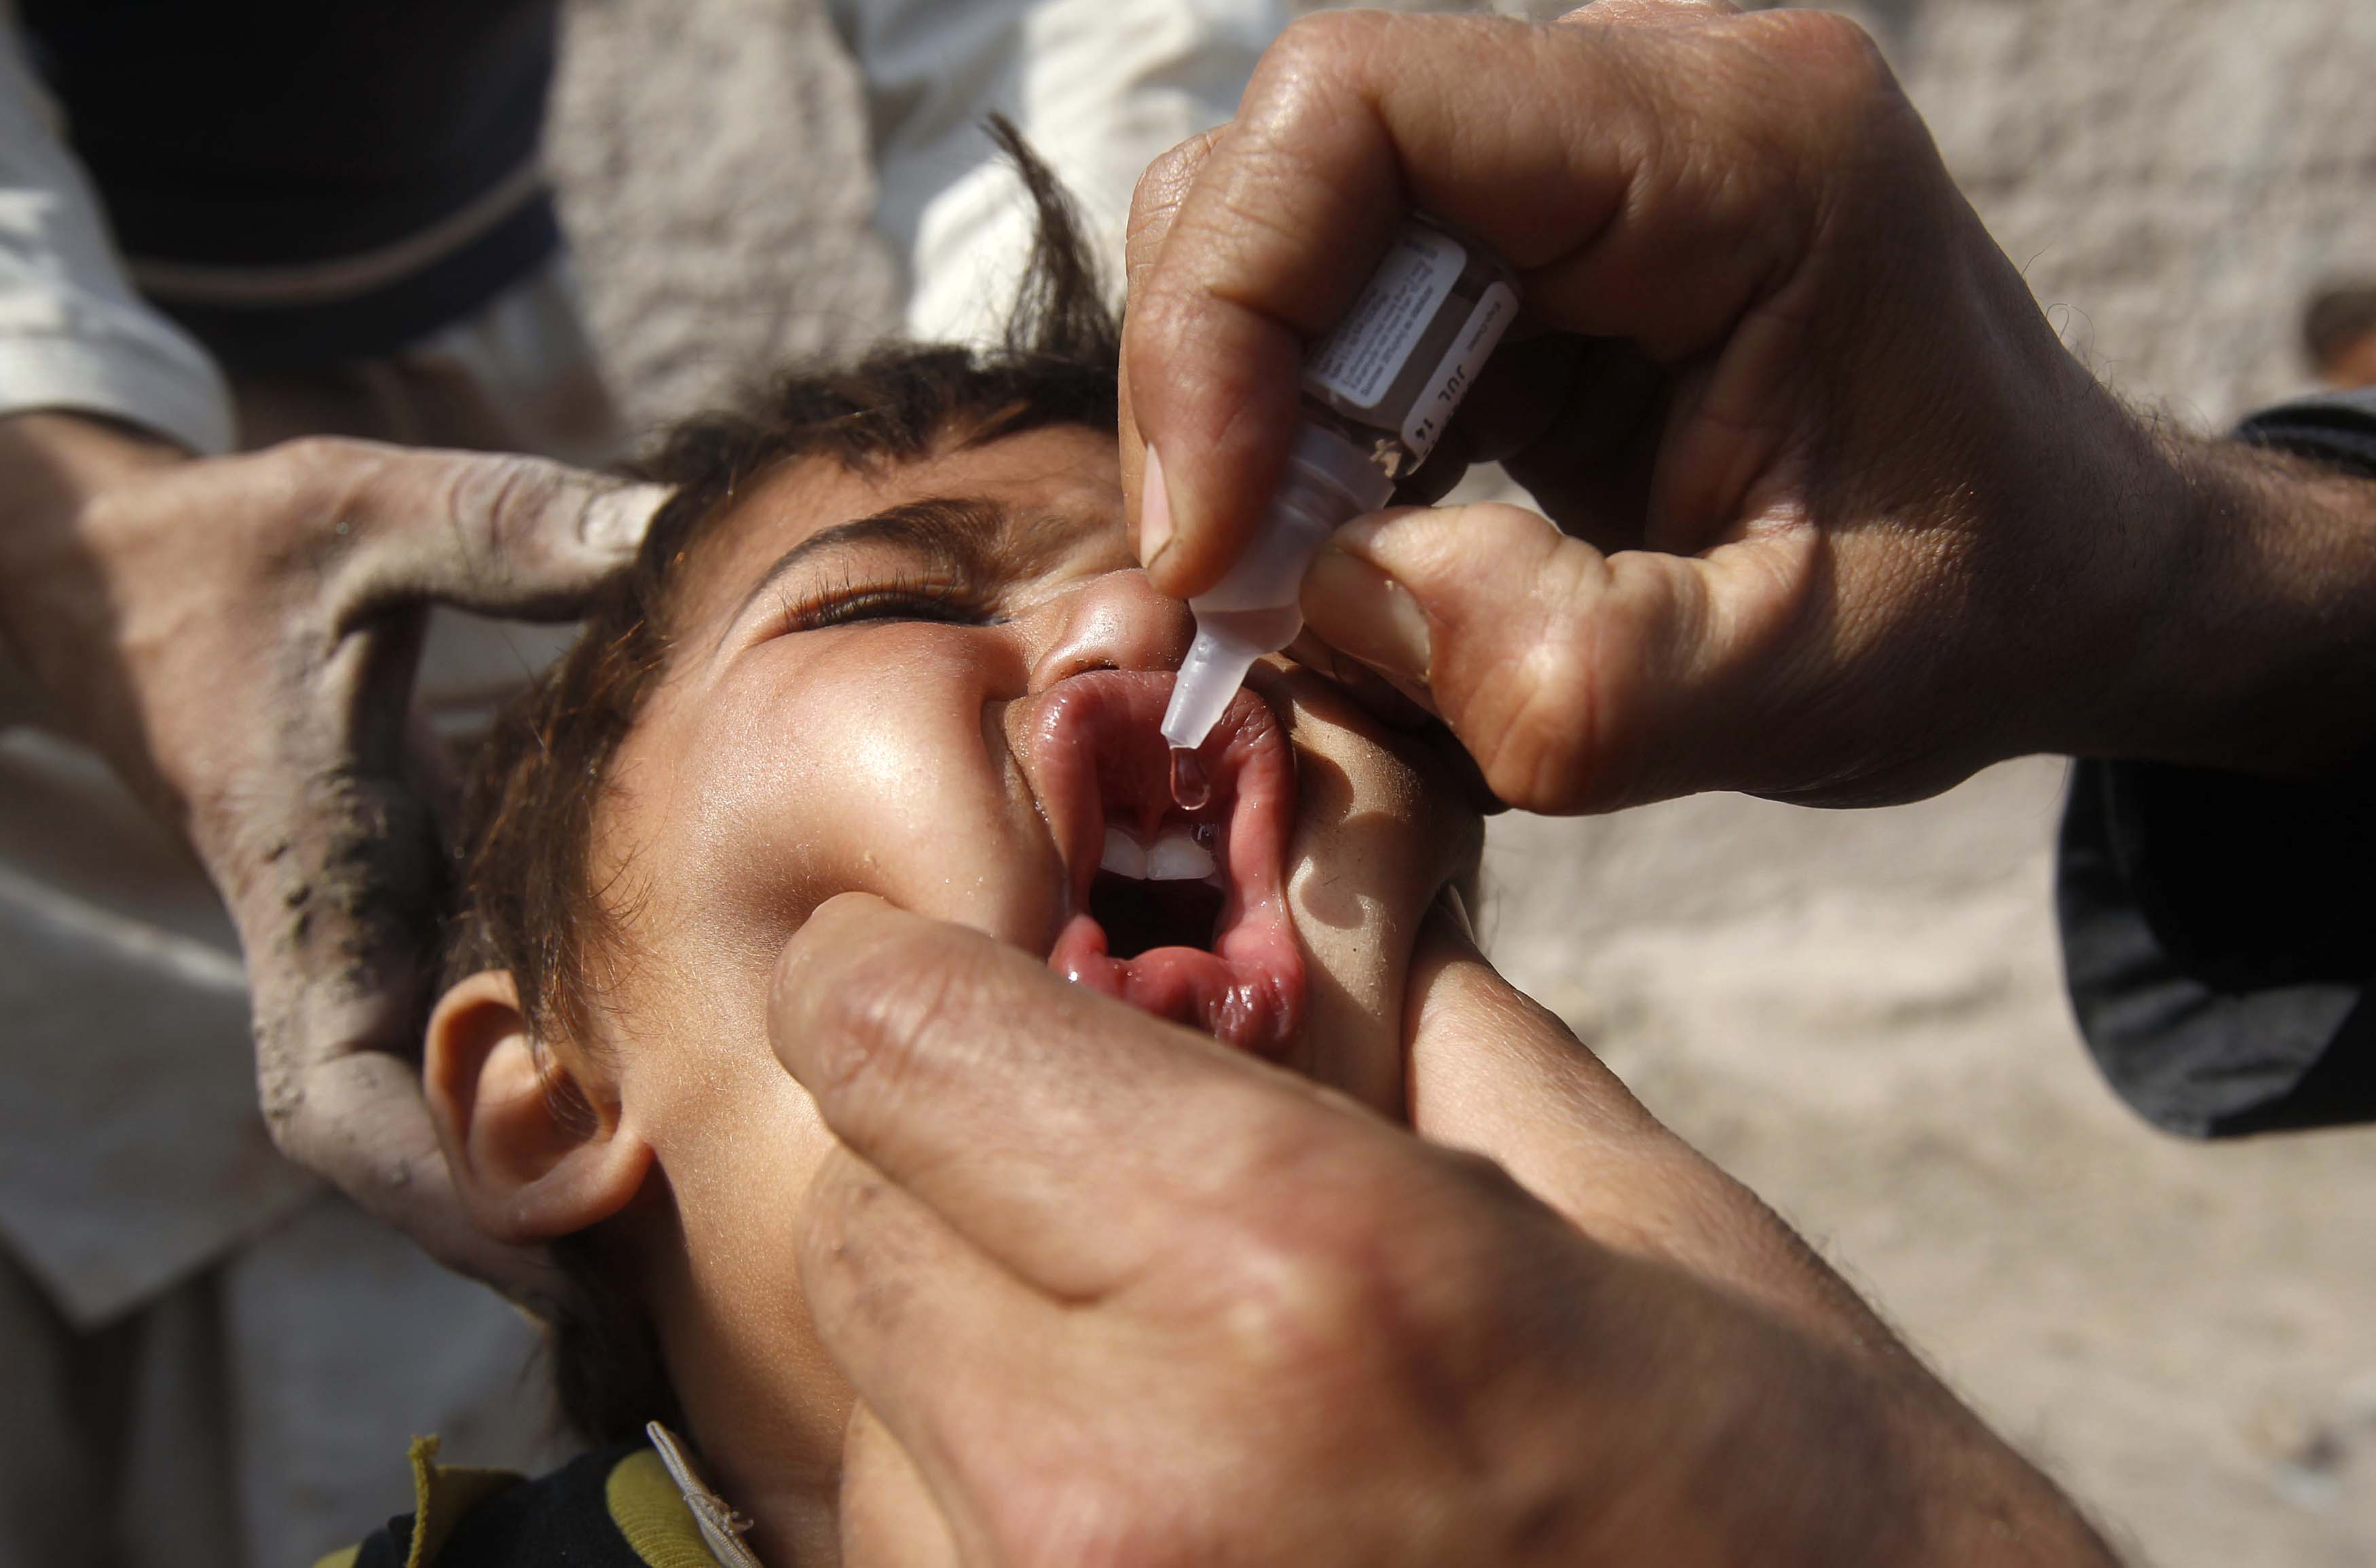 WHO, Islamic leaders summit to stop polio worker attacks